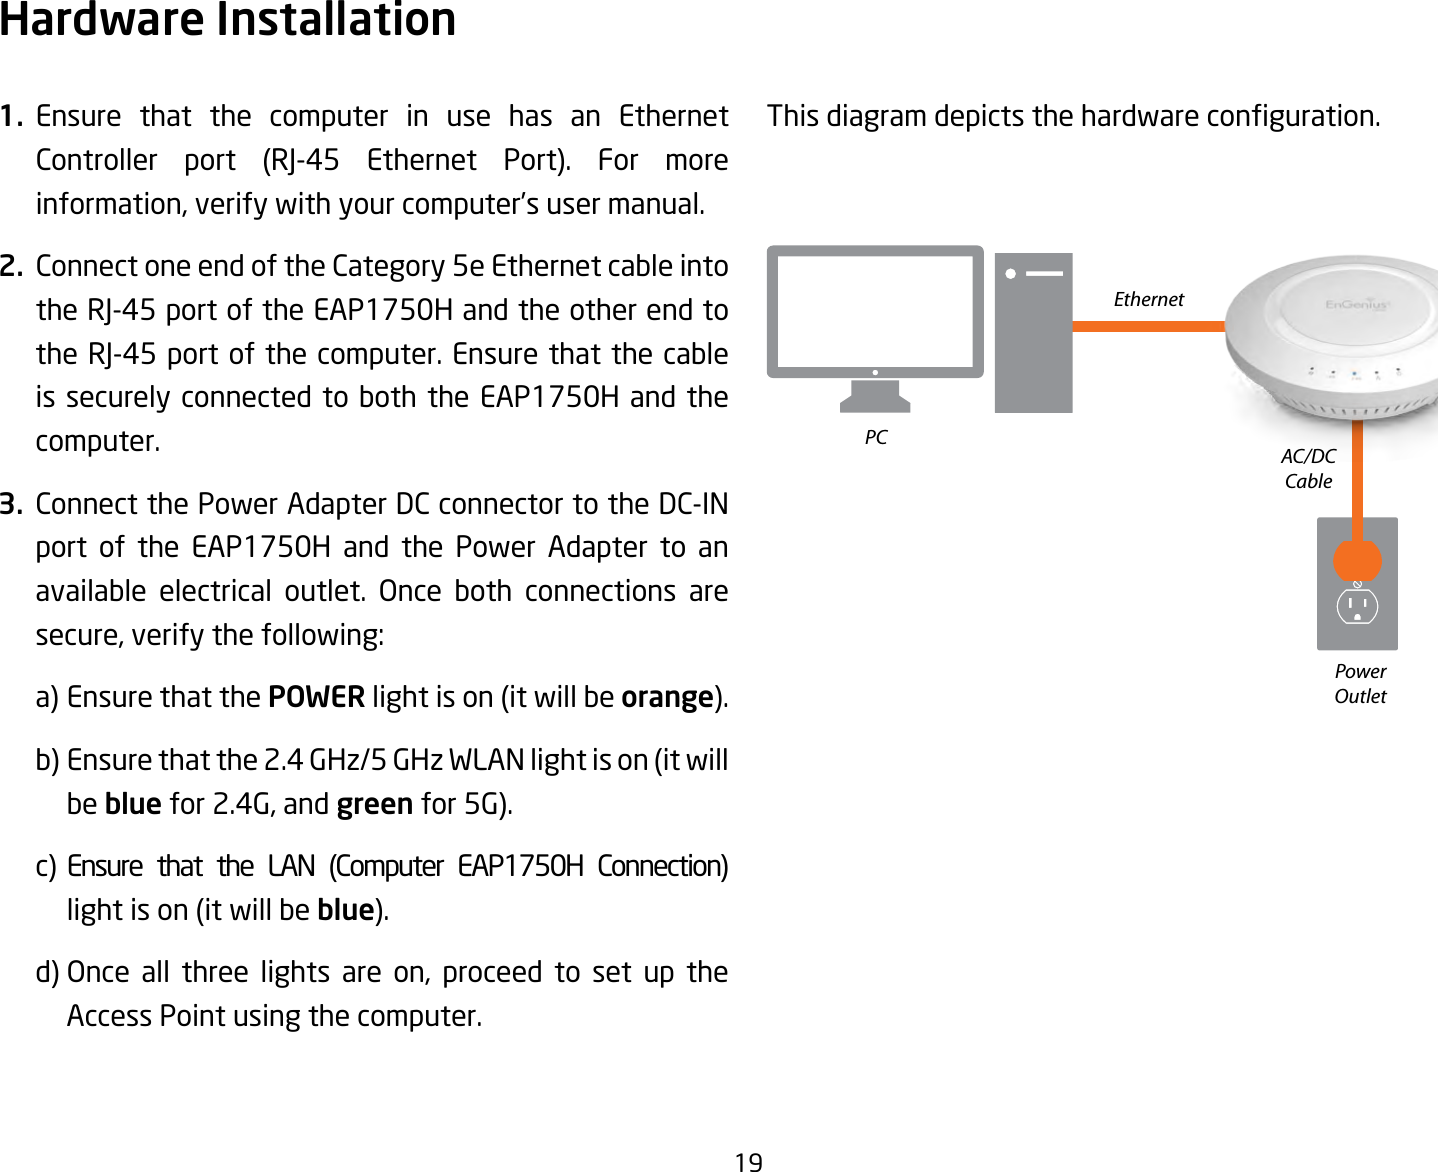 191. Ensure that the computer in use has an Ethernet Controller port (RJ-45 Ethernet Port). For moreinformation,verifywithyourcomputer’susermanual.2.  Connect one end of the Category 5e Ethernet cable into theRJ-45portoftheEAP1750HandtheotherendtotheRJ-45portofthecomputer.Ensurethatthecableis securely connected to both the EAP1750H and the computer.3. Connect the Power Adapter DC connector to the DC-IN port of the EAP1750H and the Power Adapter to an available electrical outlet. Once both connections are secure,verifythefollowing:  a)EnsurethatthePOWERlightison(itwillbeorange).  b)Ensurethatthe2.4GHz/5GHzWLANlightison(itwill  be bluefor2.4G,andgreenfor5G).  c) EnsuregthatgthehLANg(ComputergEAP1750HgConnection)  lightison(itwillbeblue).  d)Once all three lights are on, proceed to set up the   Access Point using the computer.Thisdiagramdepictsthehardwareconguration.Hardware InstallationEthernetPCPowerOutletAC/DC Cable